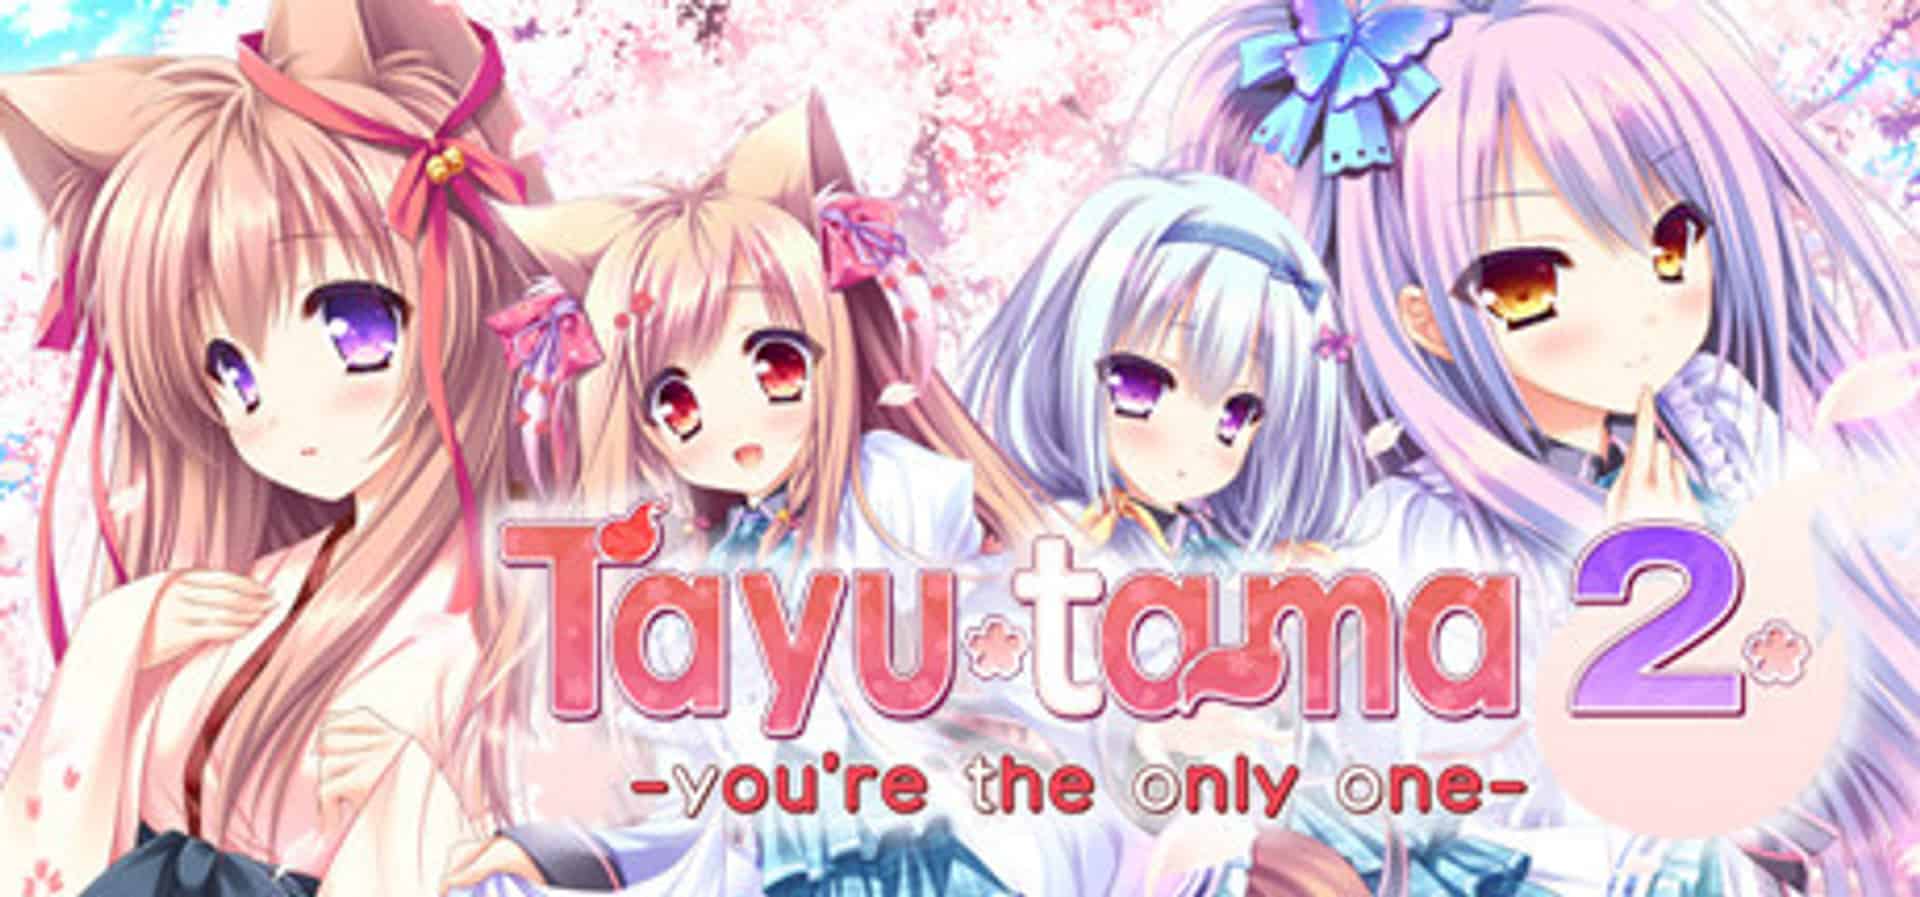 tayutama 2 -you're the only one-